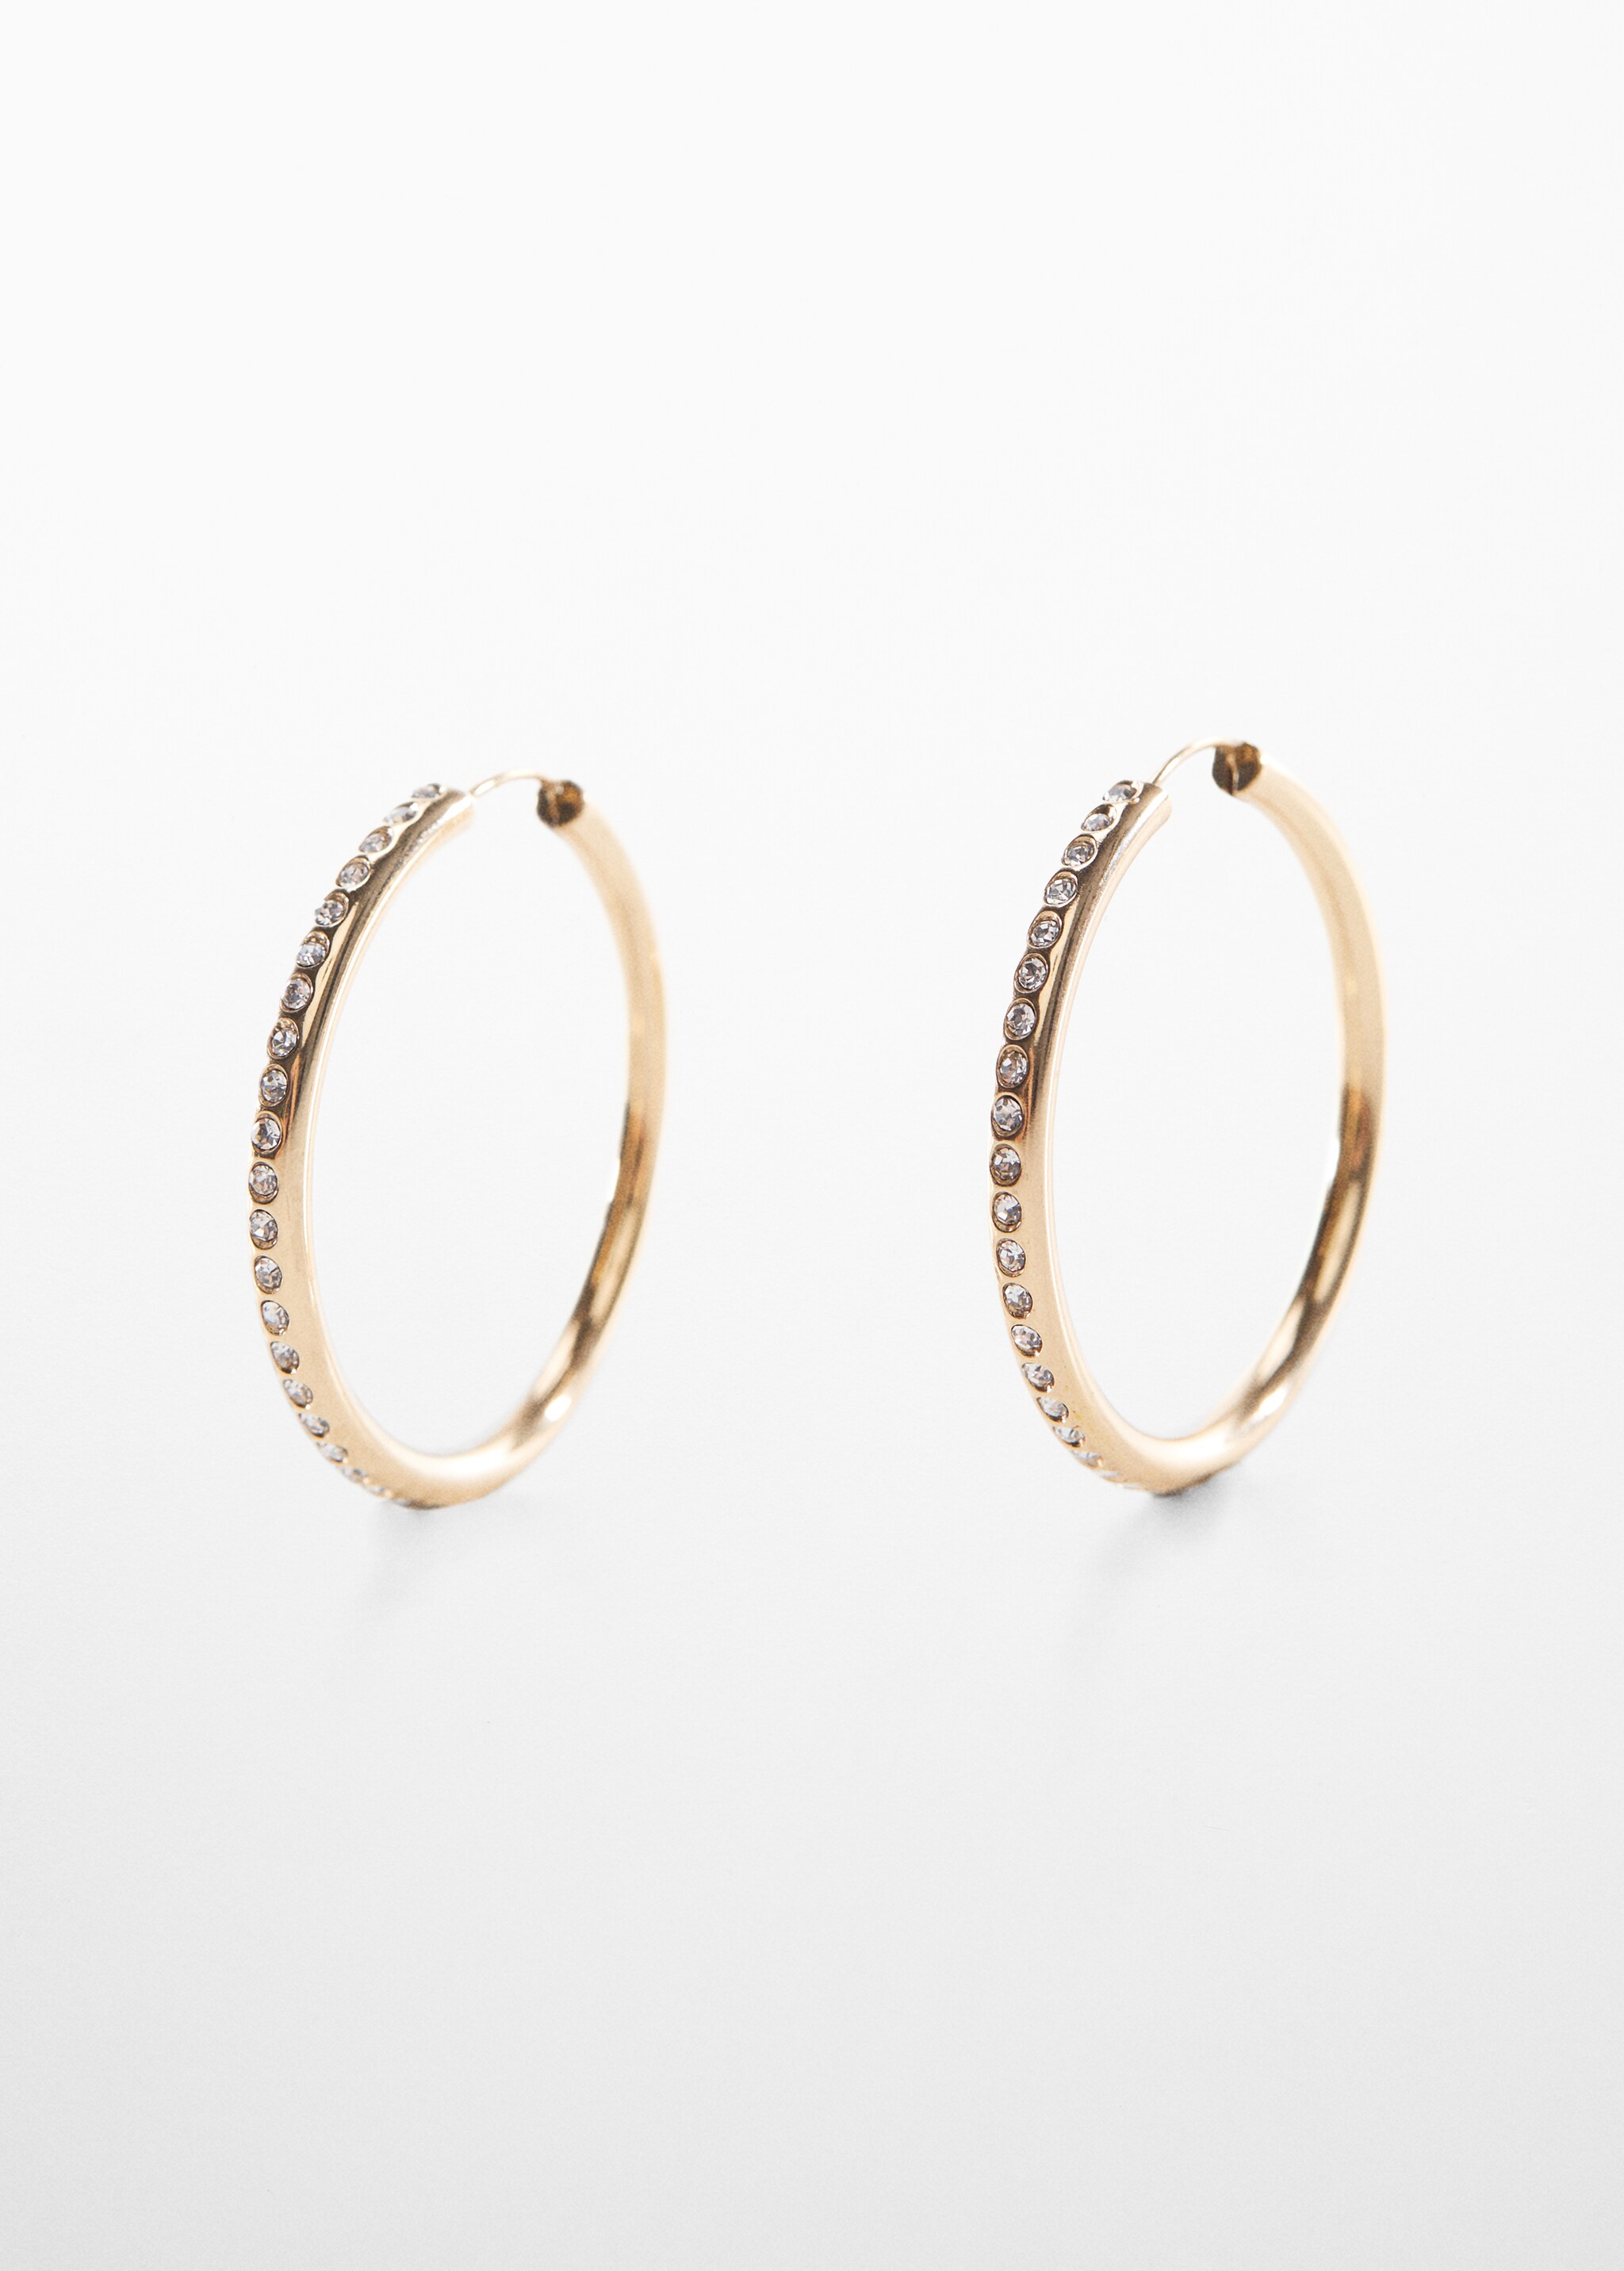 Faceted crystal hoop earrings - Article without model